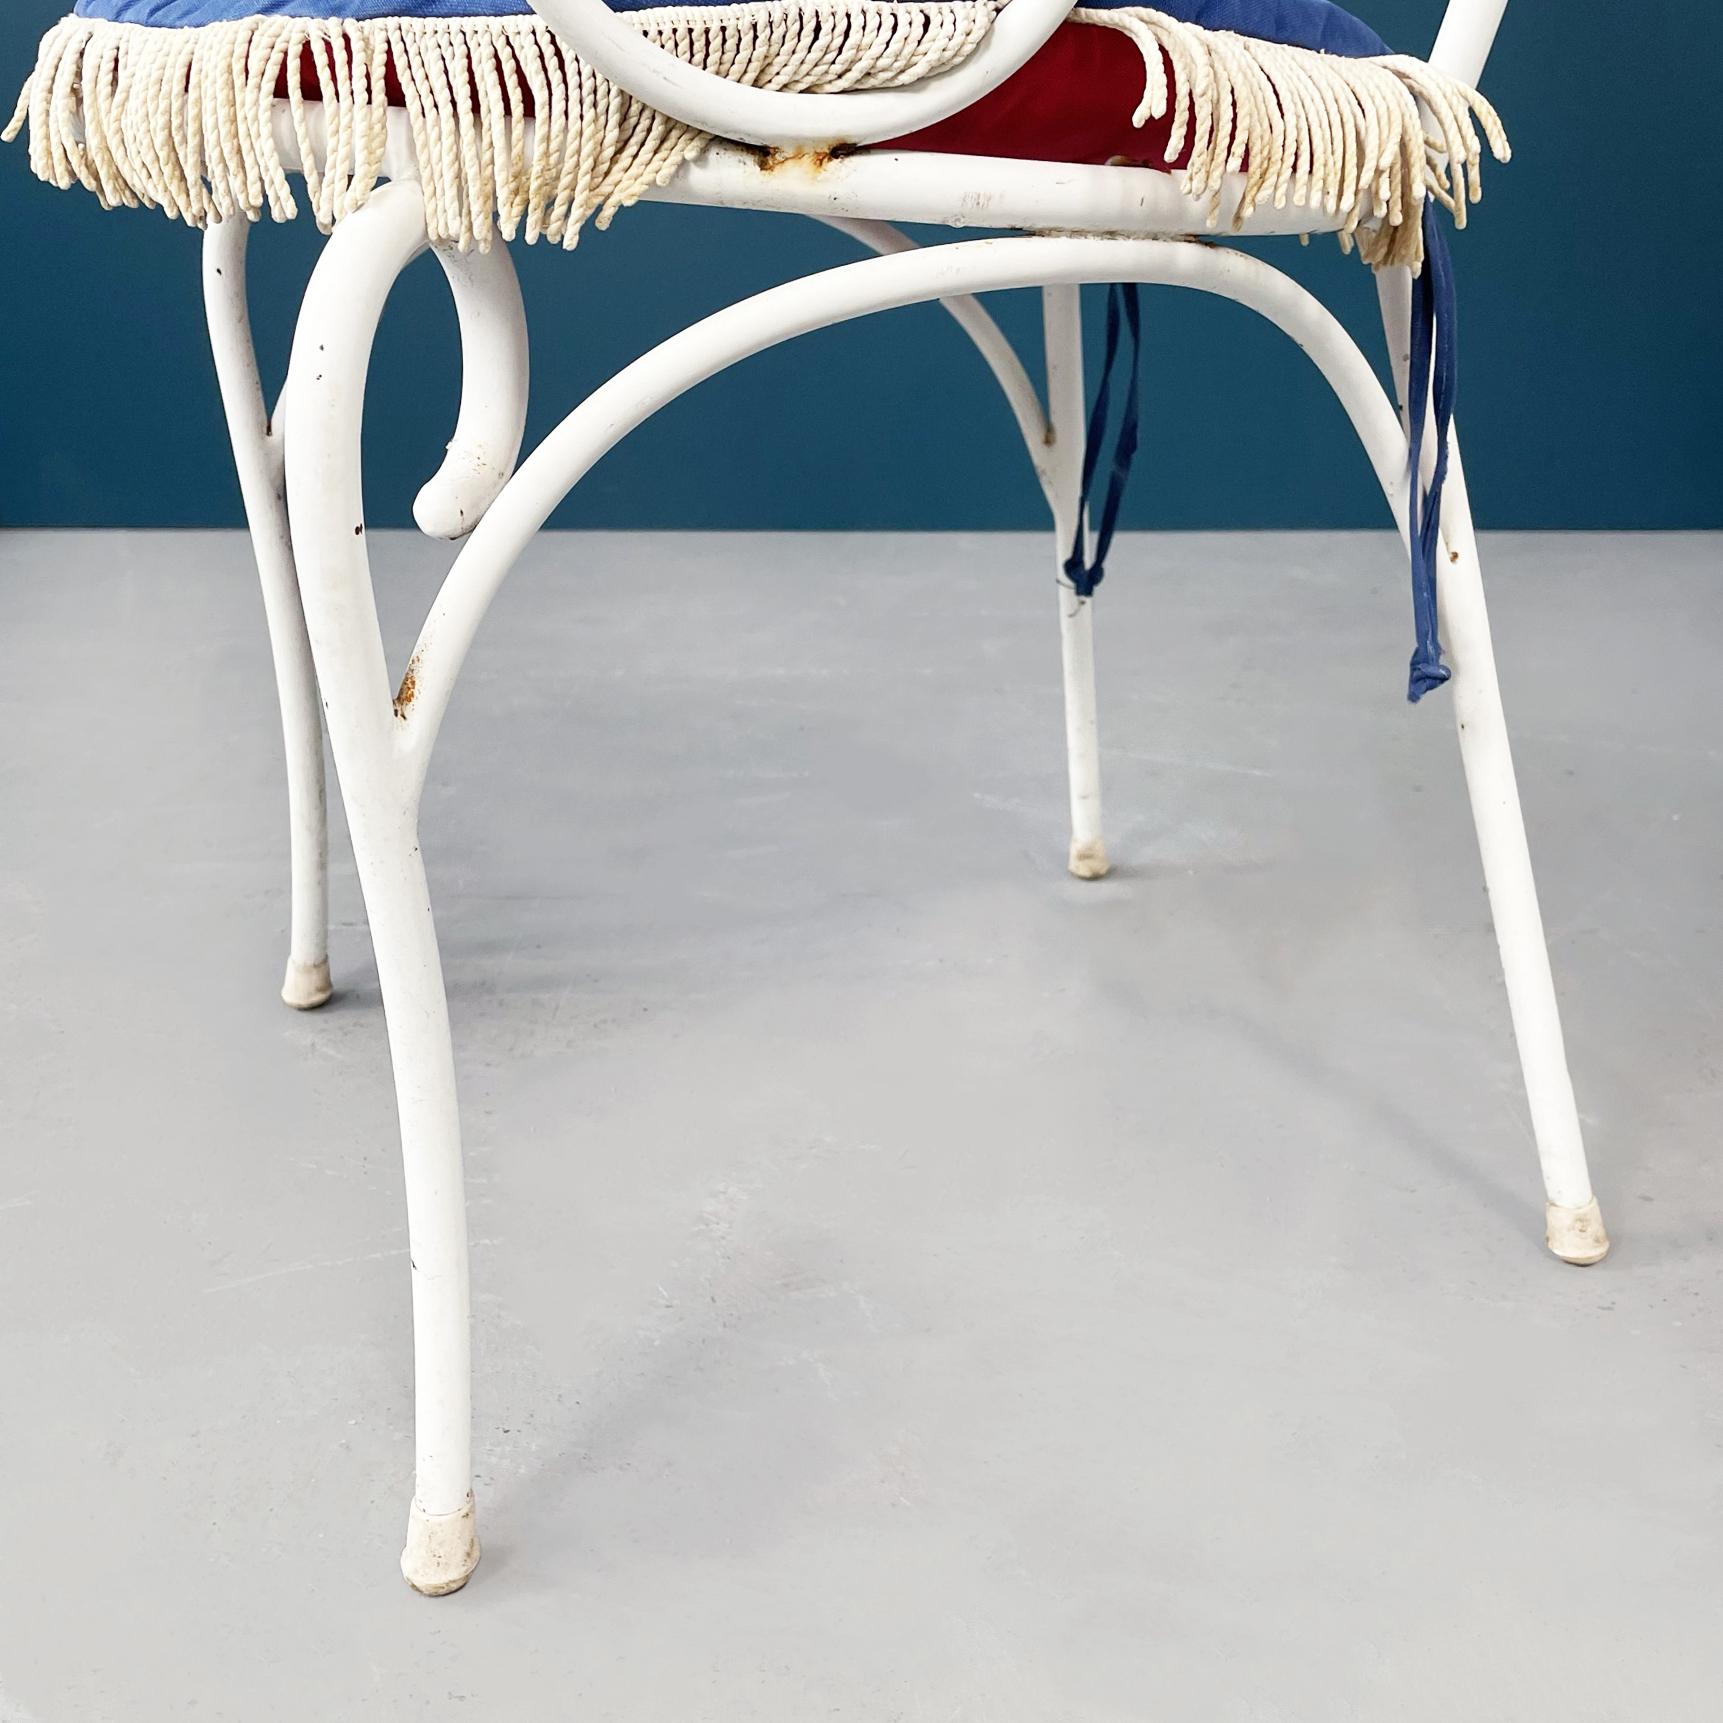 Italian Mid-Century Garden Chairs Table in White Wrought Iron Glass Fabric, 1960 For Sale 5